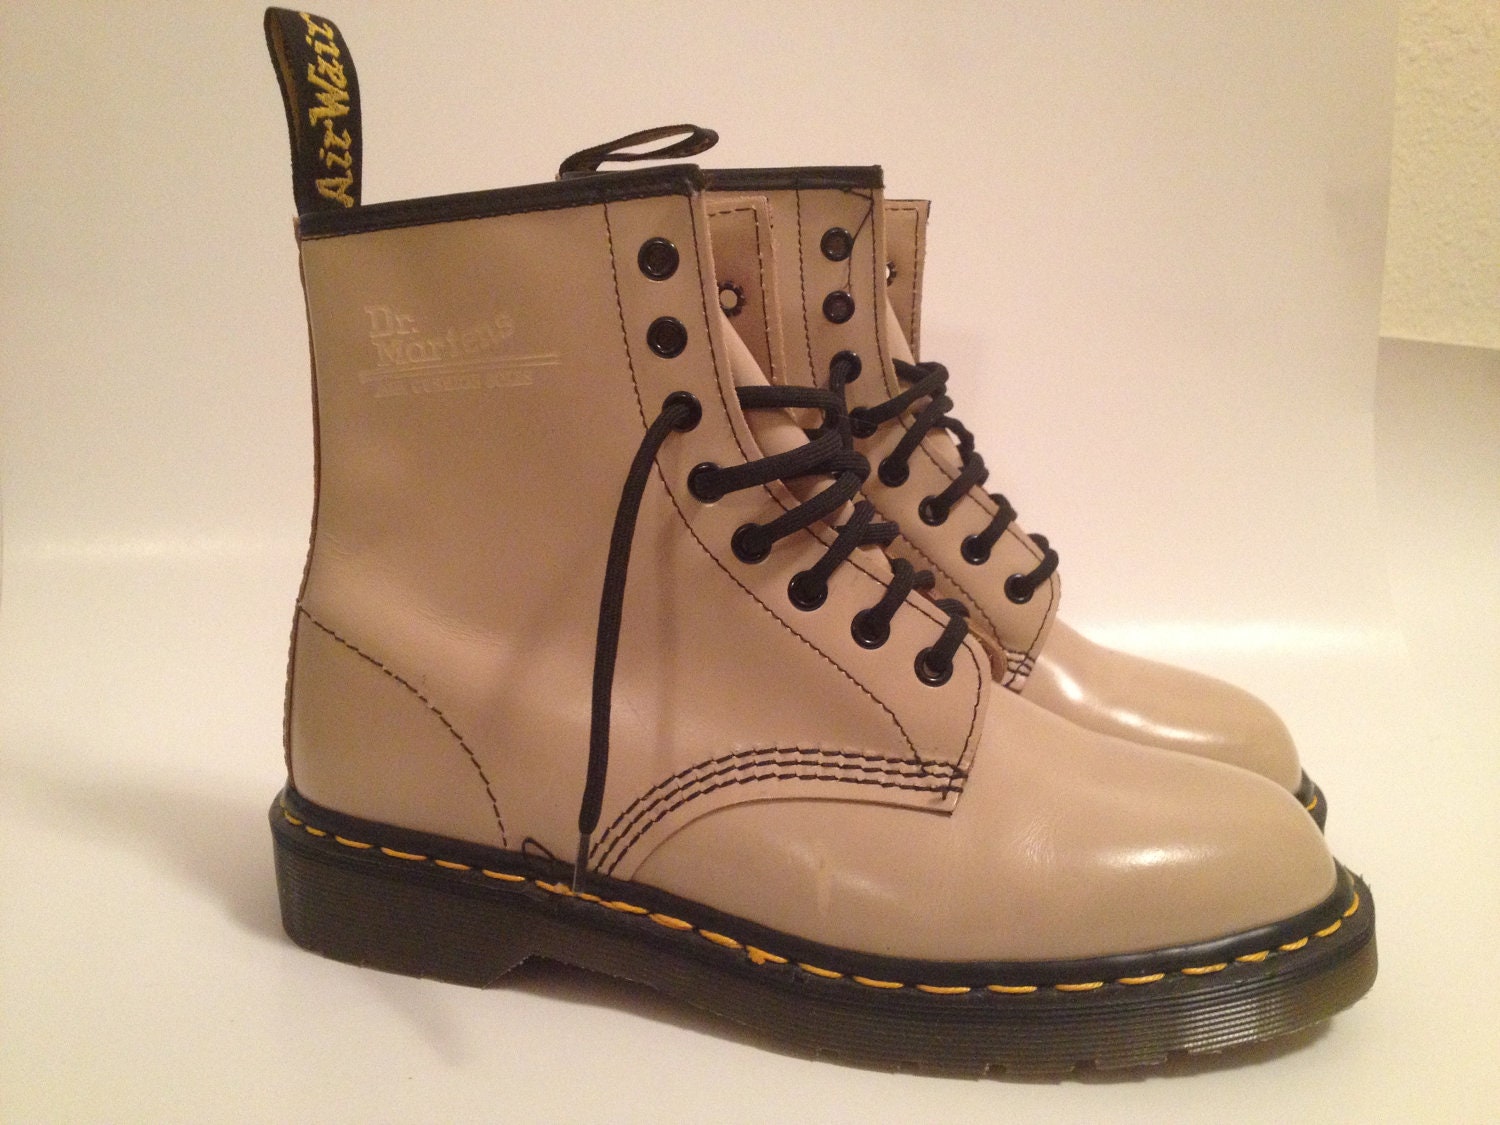 Cream Dr. Martens Boots by ClothsofGold on Etsy